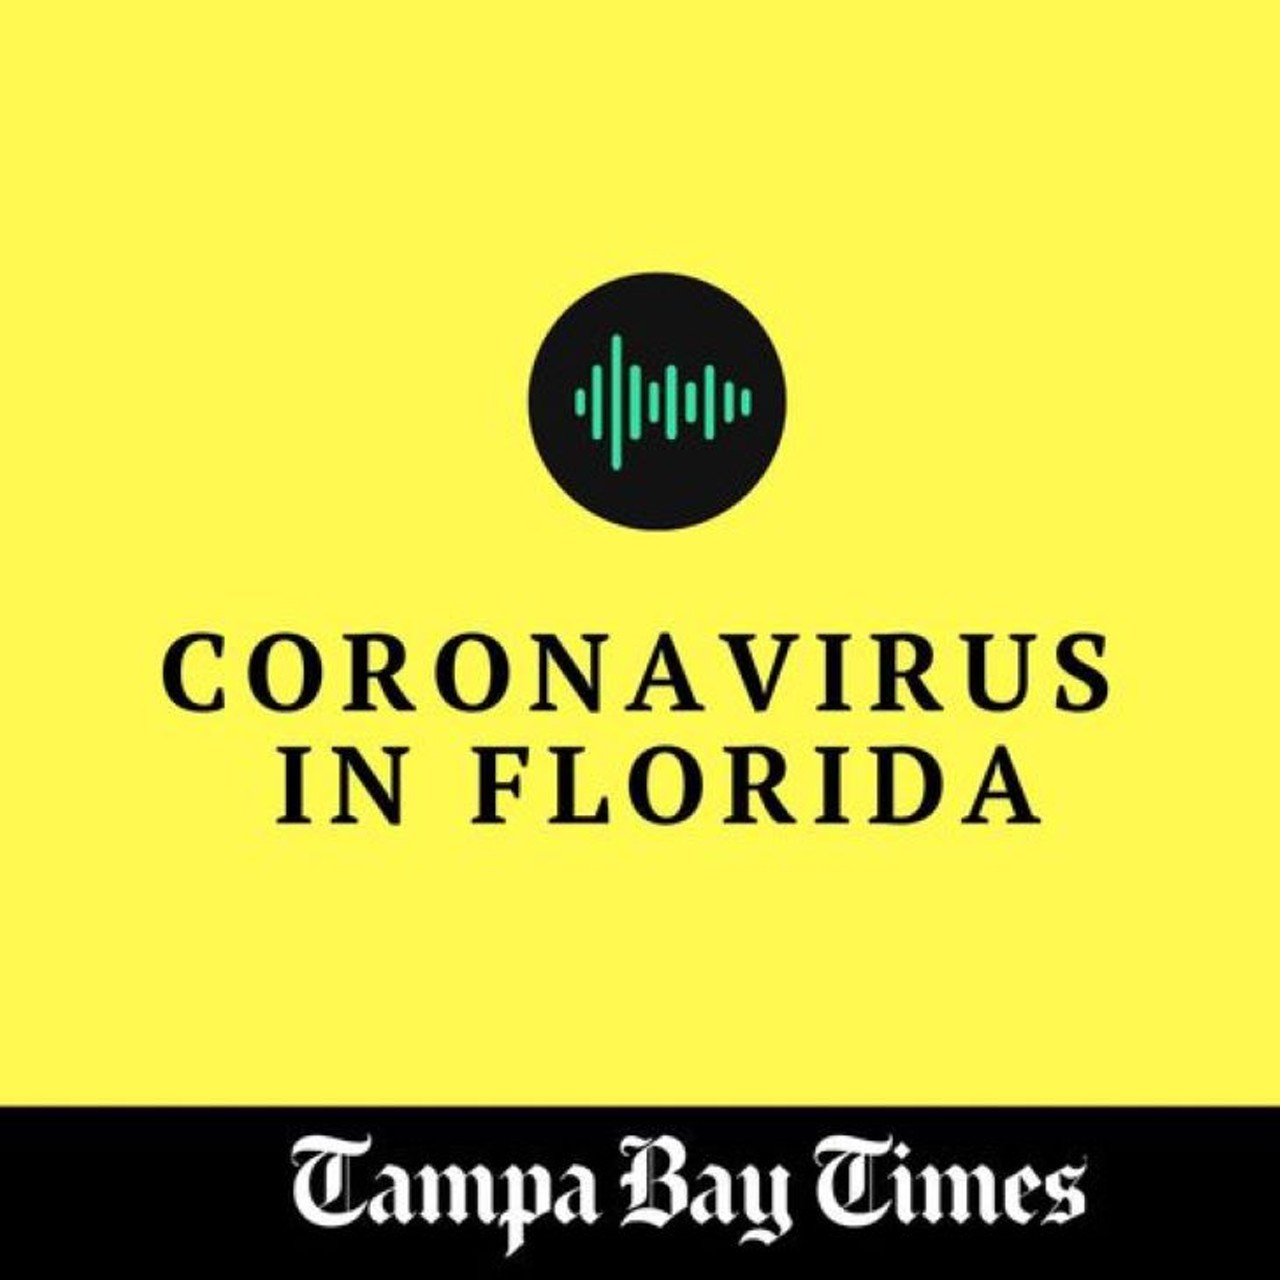 Tampa Bay Times&#146; &#147;Coronavirus in Florida&#148;
We start our days with the &#147;Up First&#148; newsblast from NPR, but this one from &#147;Florida&#146;s Best Newspaper&#148; is a good companion these days. tampabay.com 
Photo via Tampa Bay Times